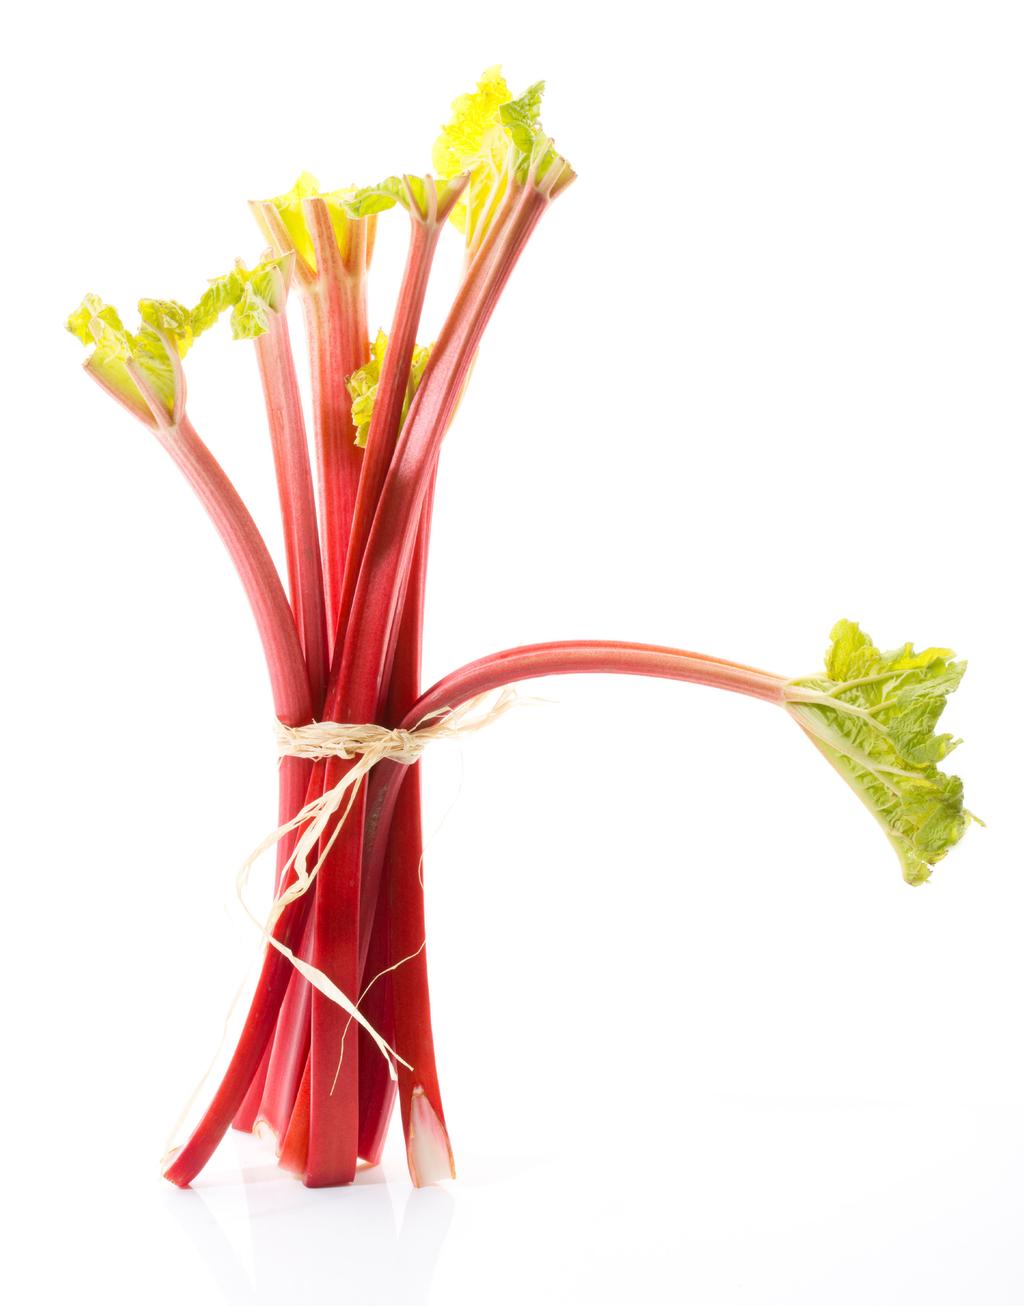 20 16 FLAVOR INSIGHT REPORT RHUBARB By the Numbers Part of the buckwheat family, rhubarb has thick, celerylike stalks and large leaves. The stalks are the only edible portion of the plant.